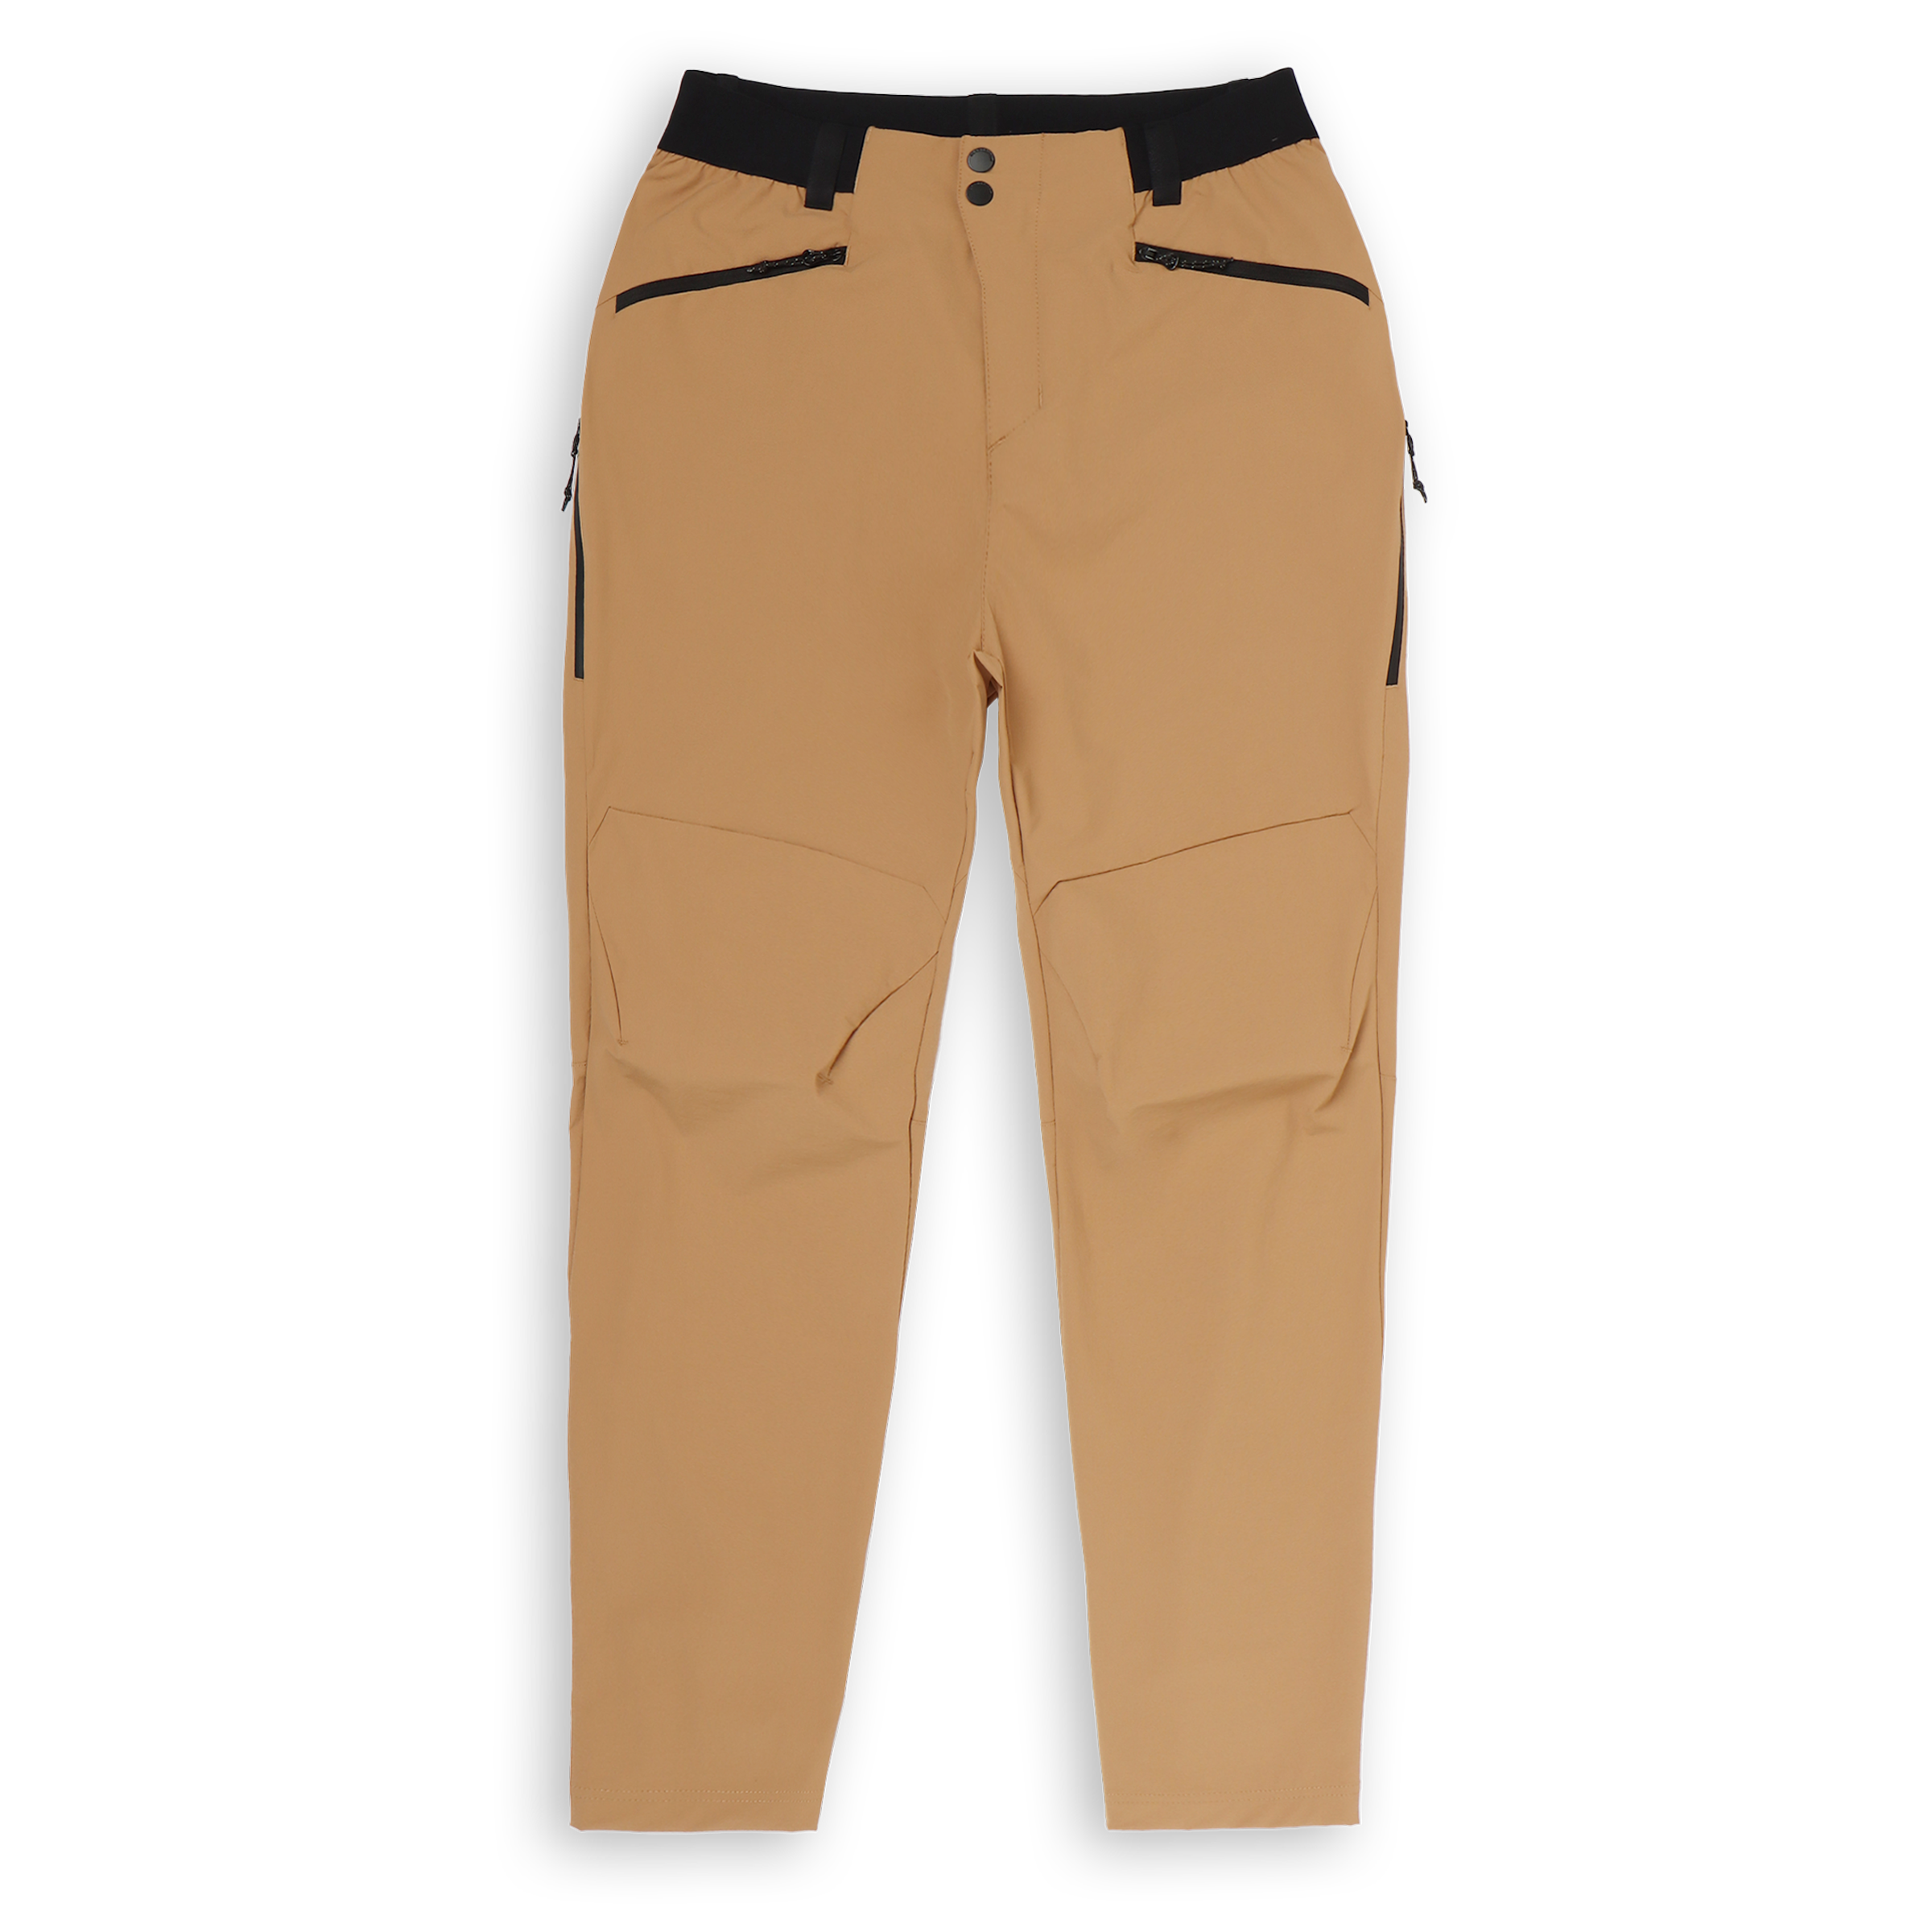 Trail Pant Desert front with zipper front pockets, elastic waistband with belt loop, and perforated side vent pockets.